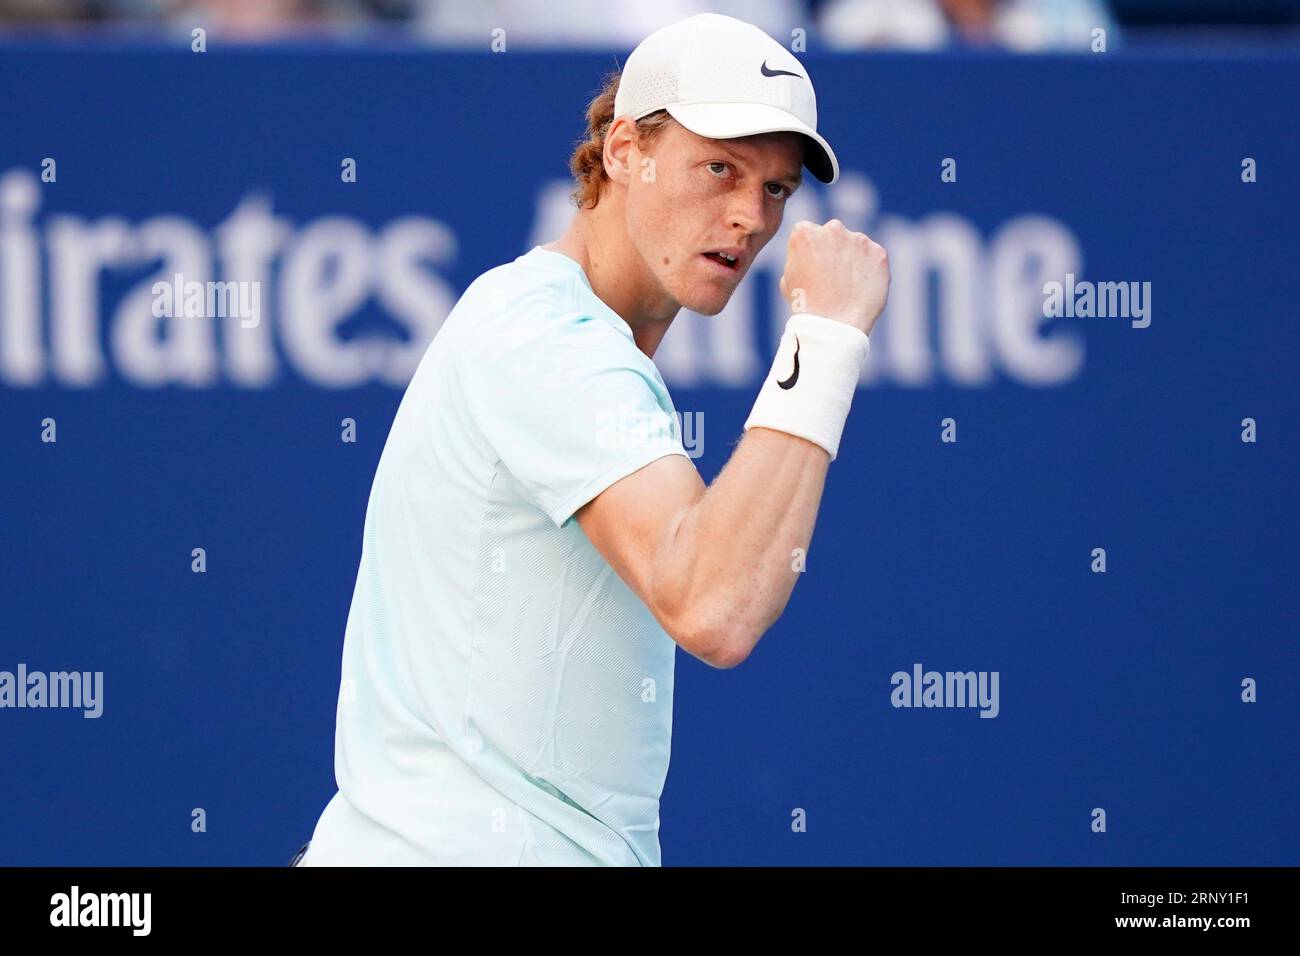 Jannik Sinner reacts during a mens singles match at the 2023 US Open, Saturday, Sep